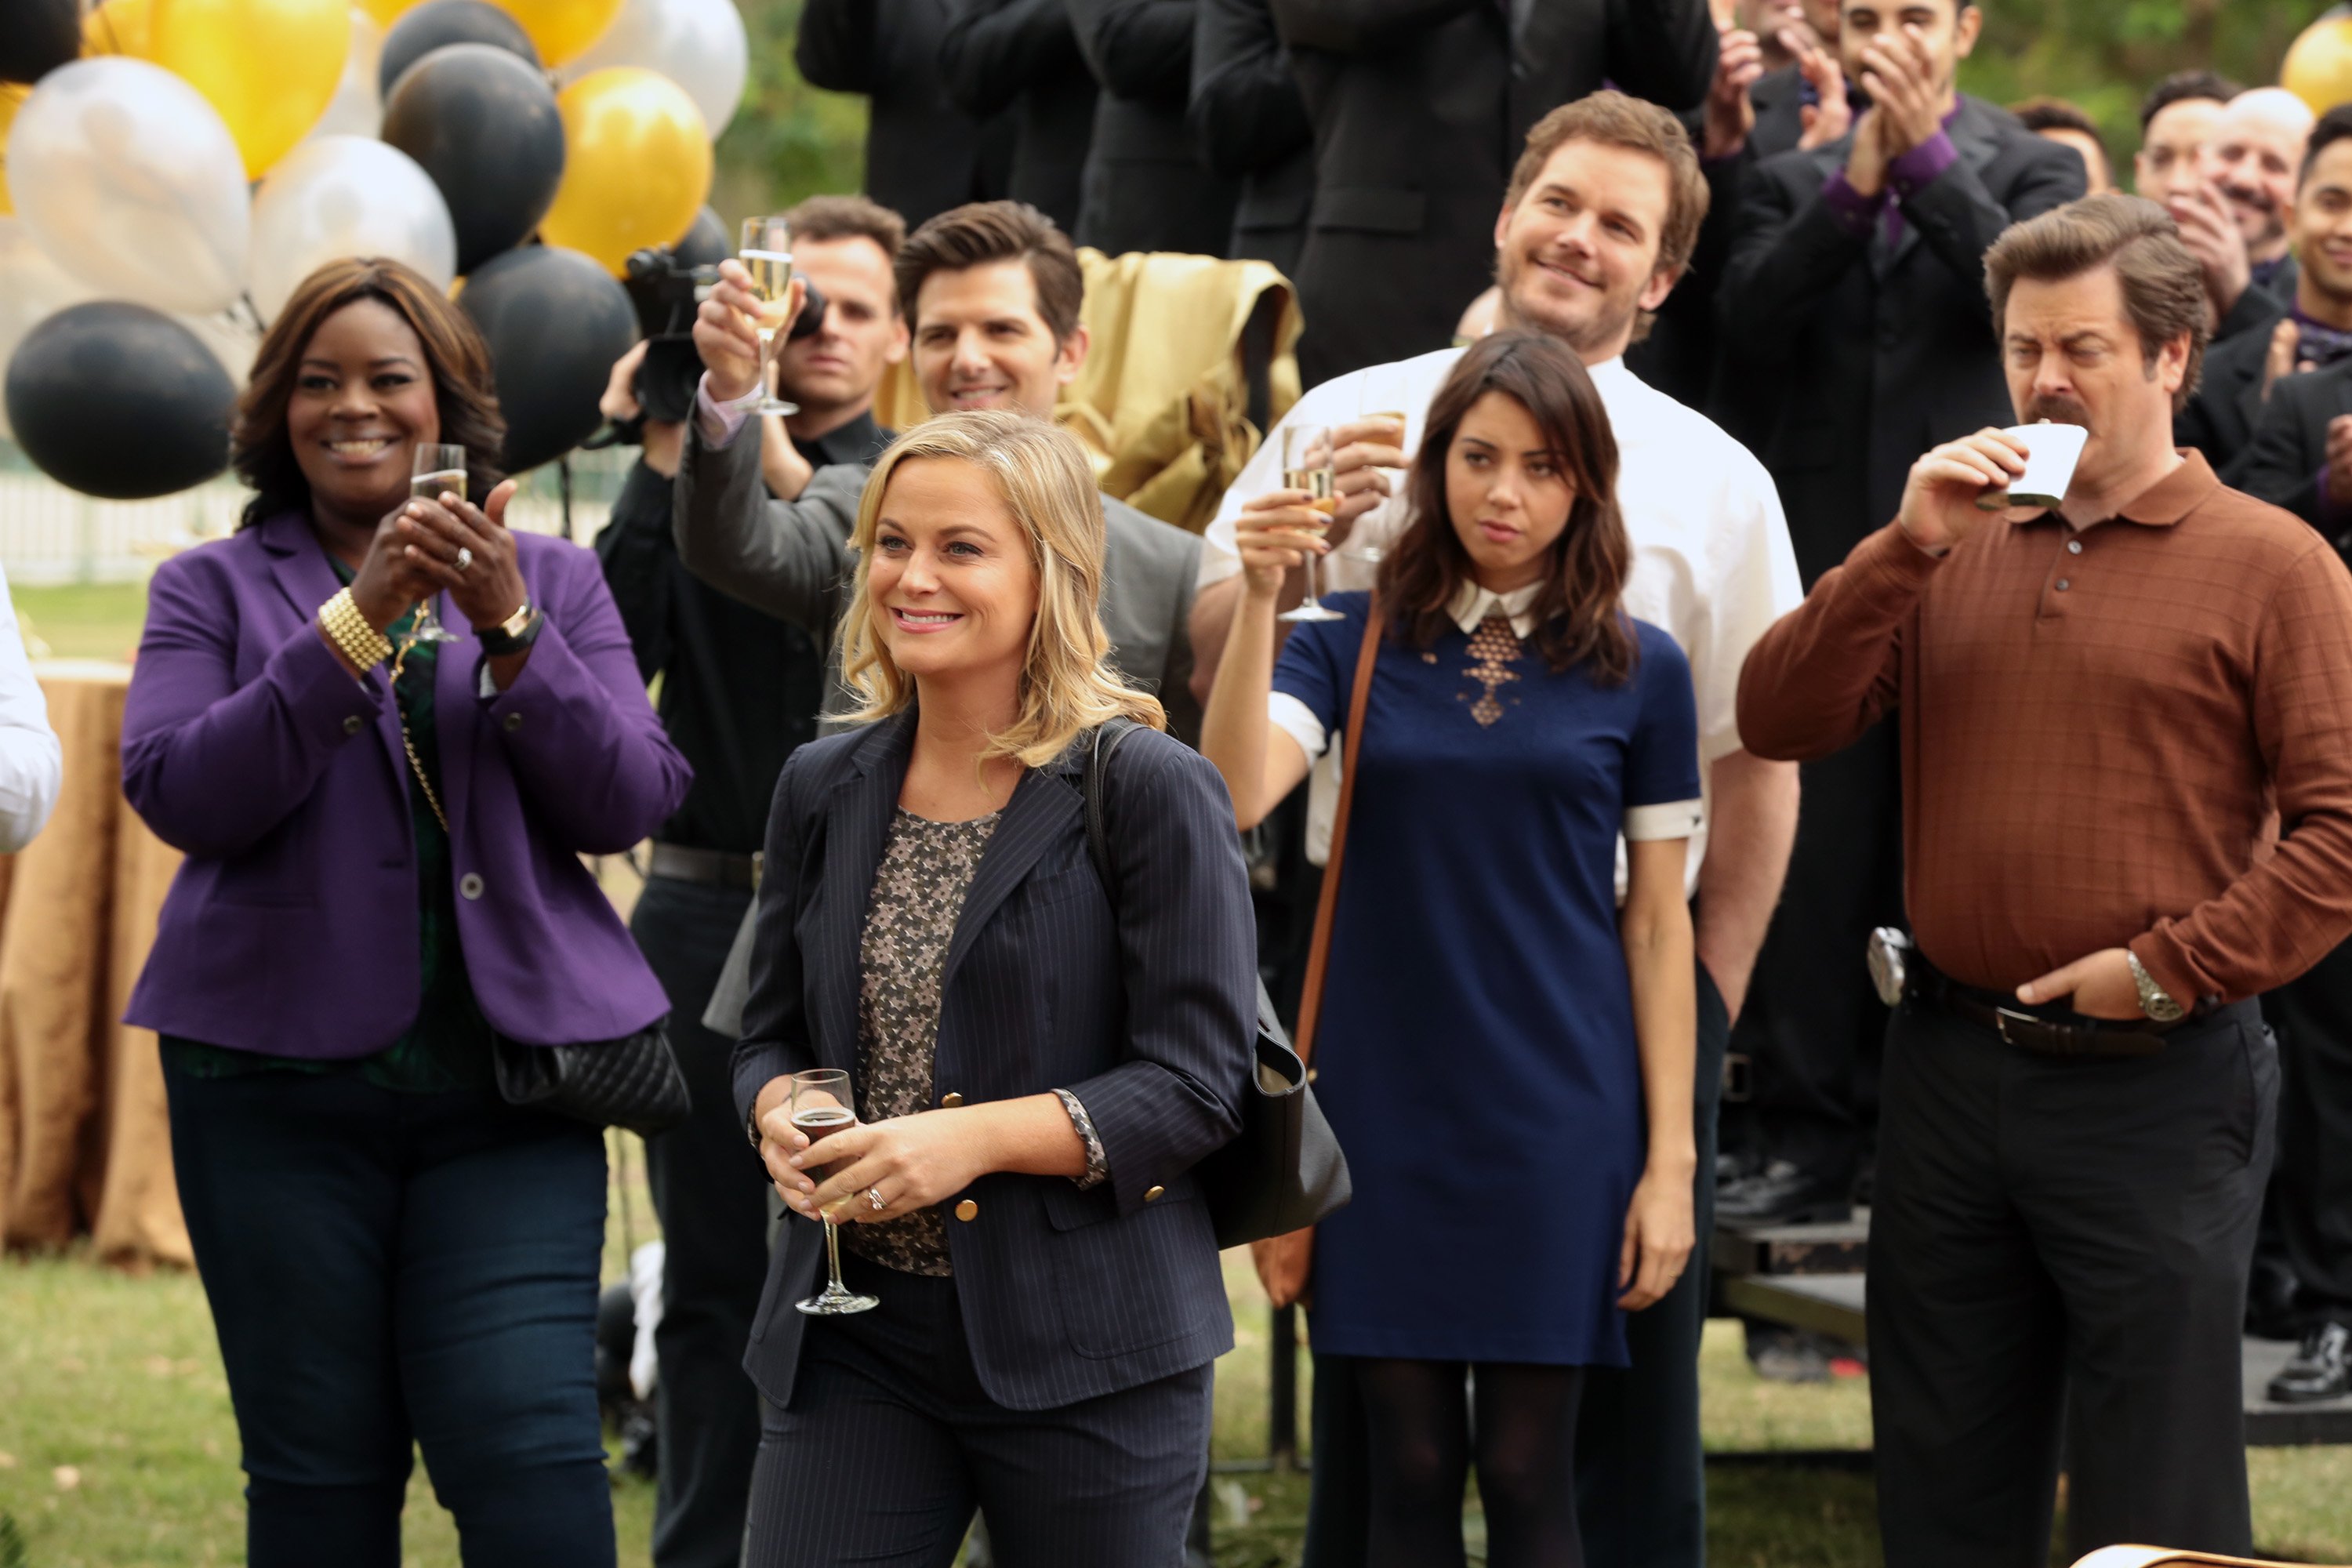 Parks and Recreation cast raises glasses in a toast